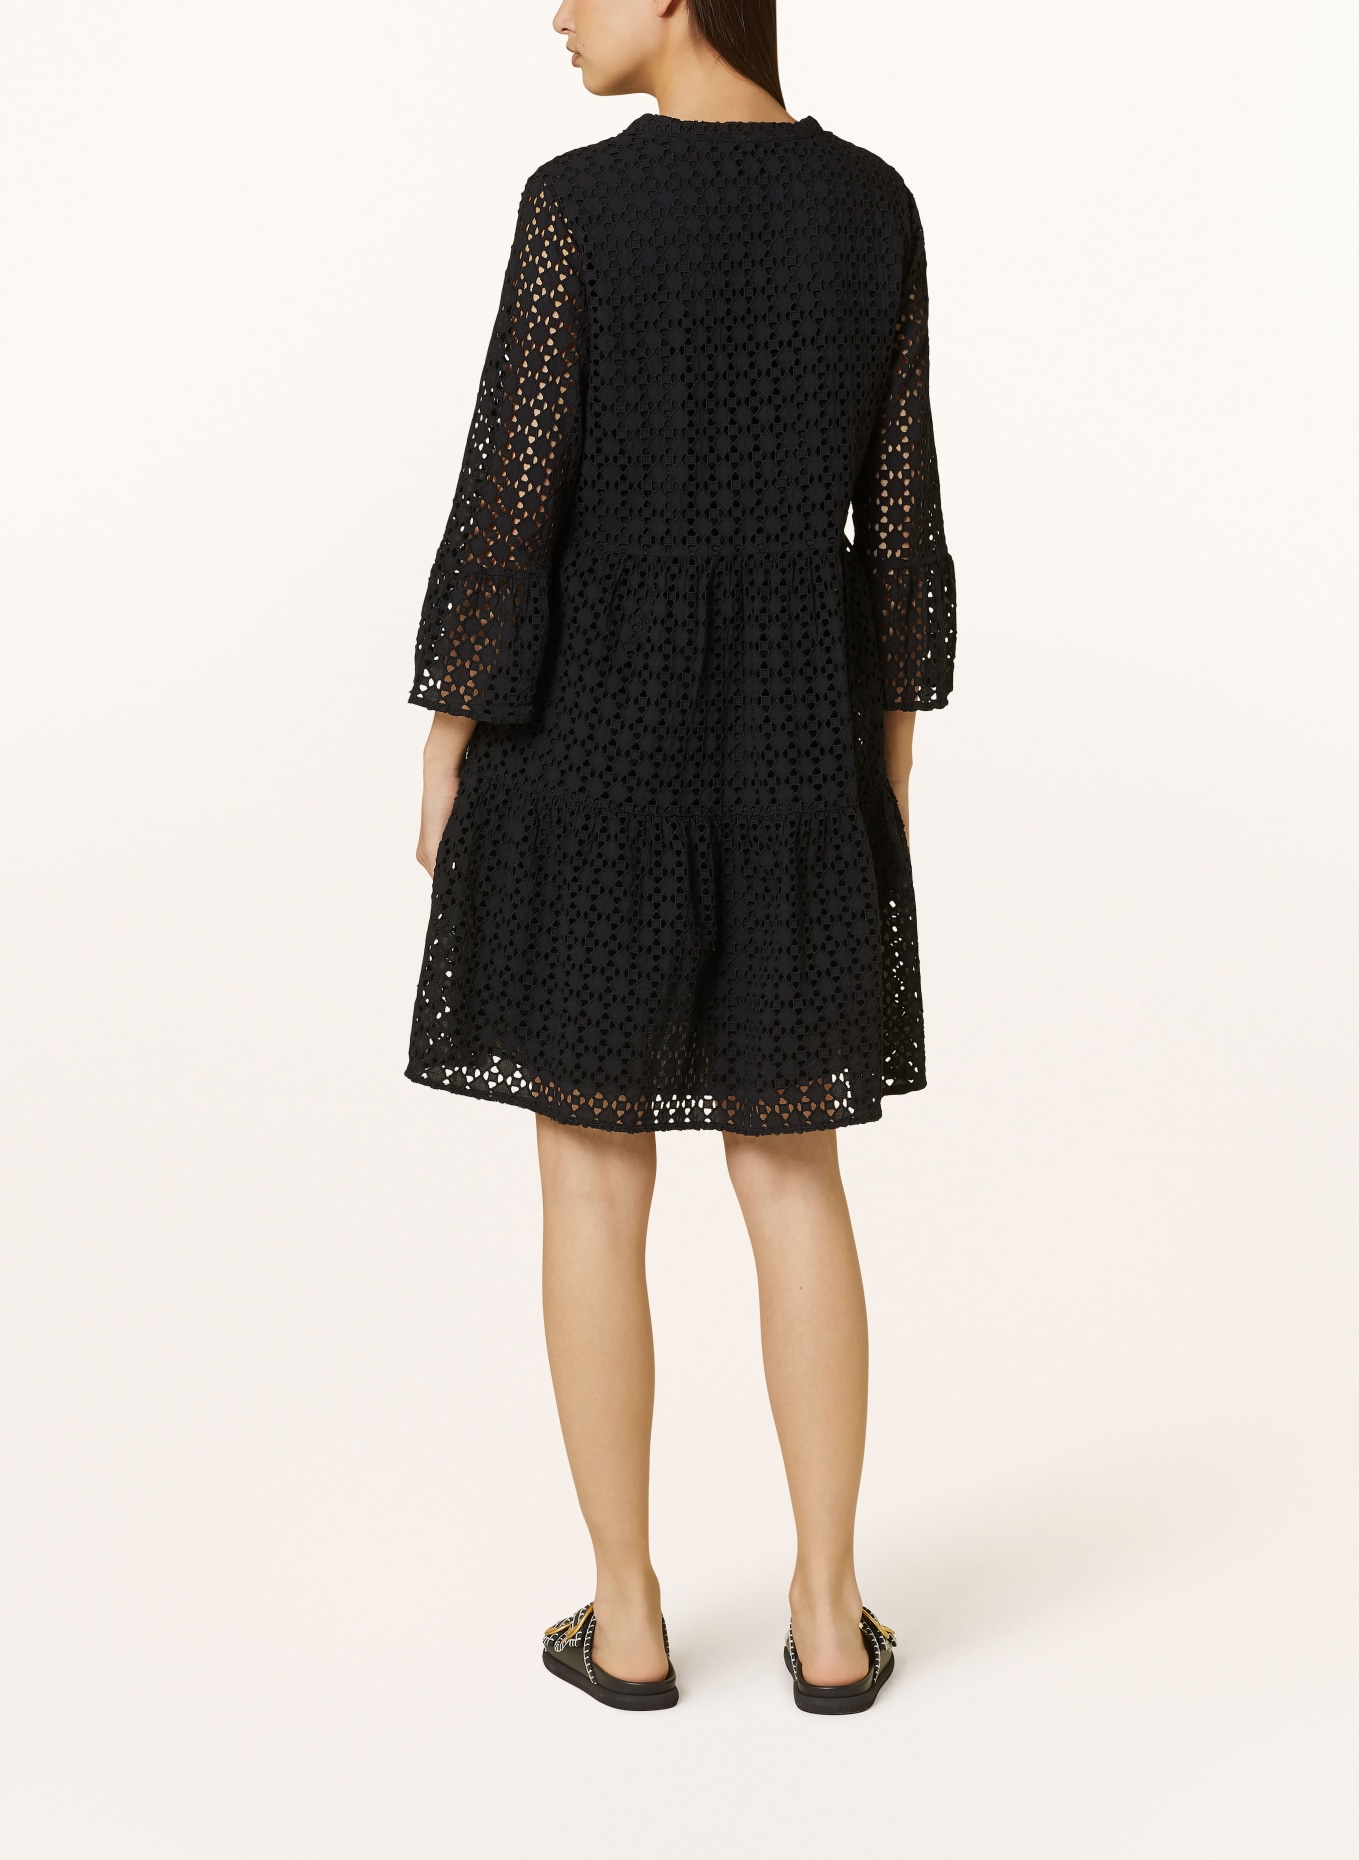 CARTOON Dress in broderie anglaise with 3/4 sleeves, Color: BLACK (Image 3)